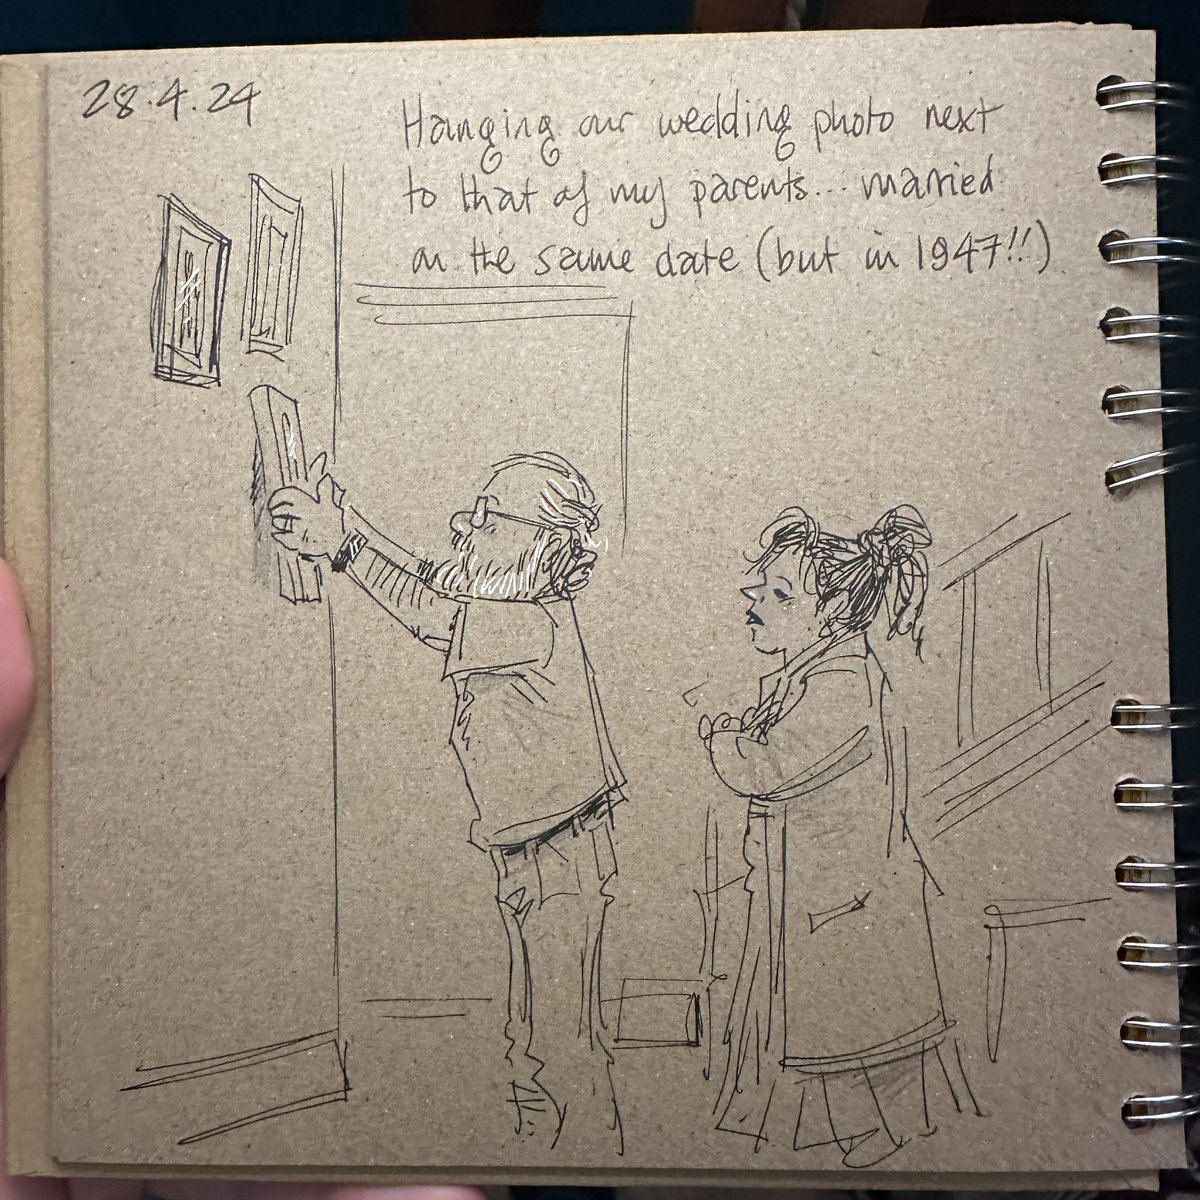 I love that our wedding anniversary will be the same as my parents. Both sadly long gone now but sharing the date brings me closer to them once more. #doodleaday #loveafterloss